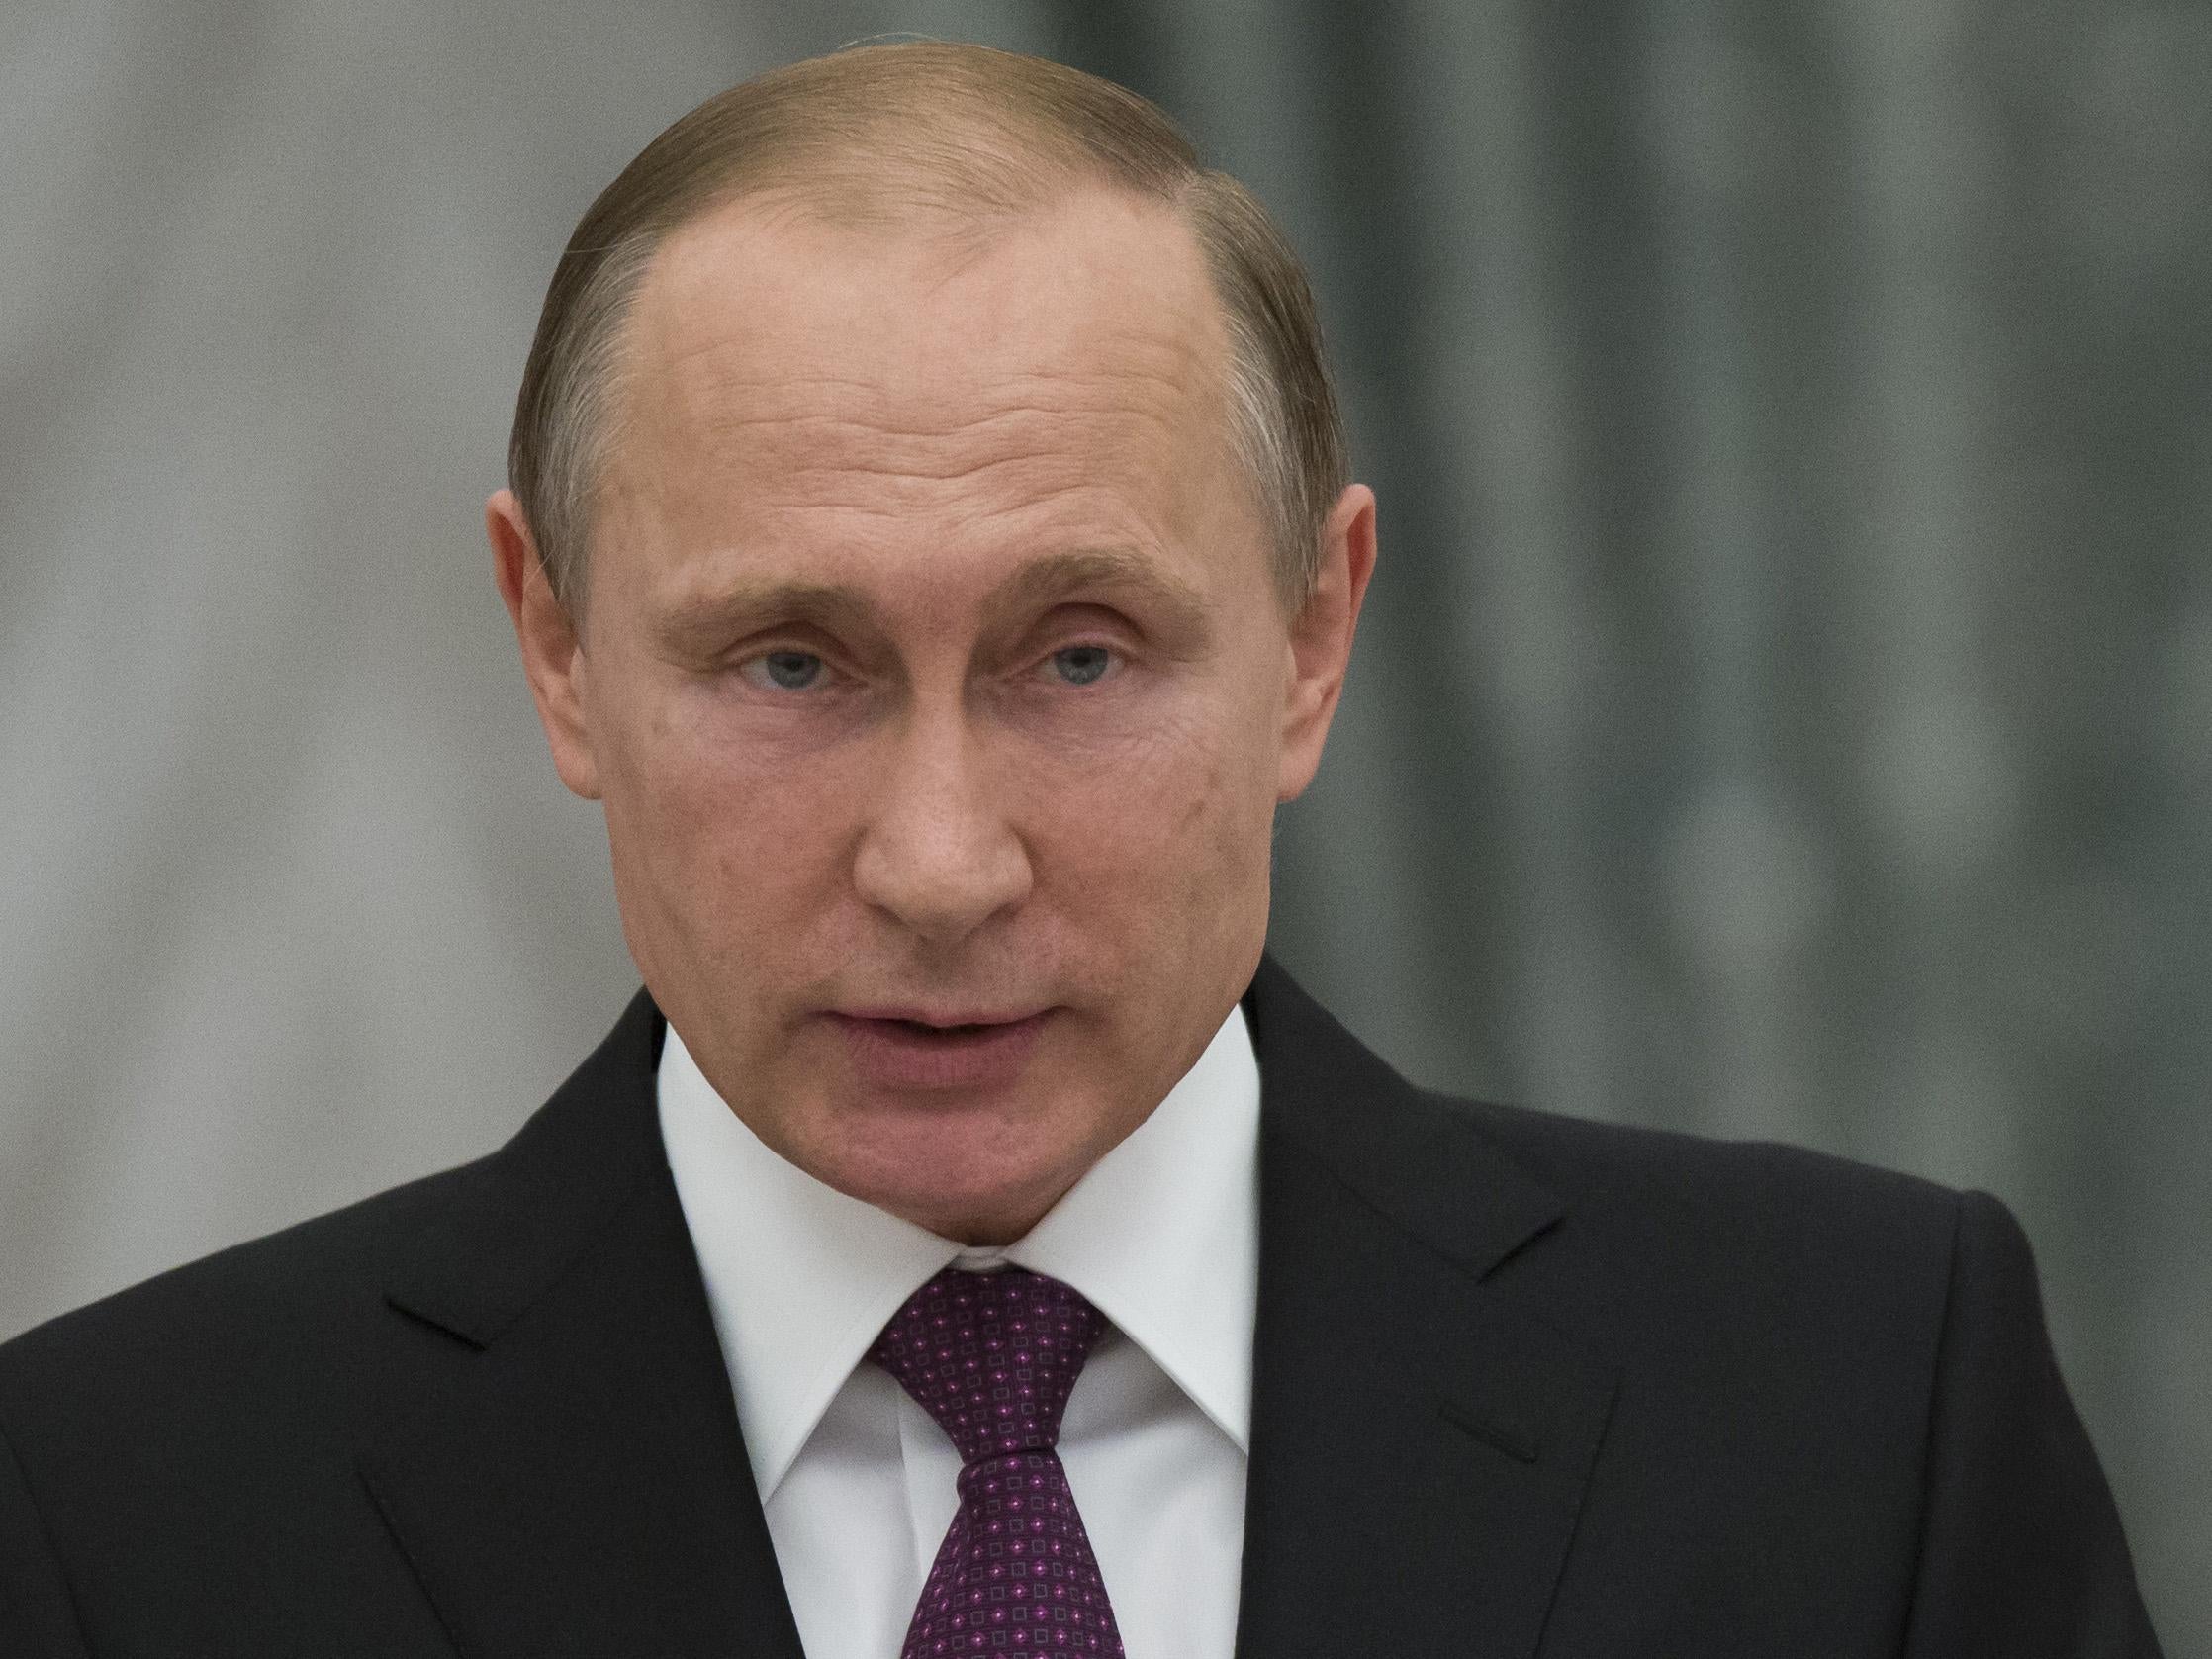 The men strongly object to Putin's gay 'propaganda' law.